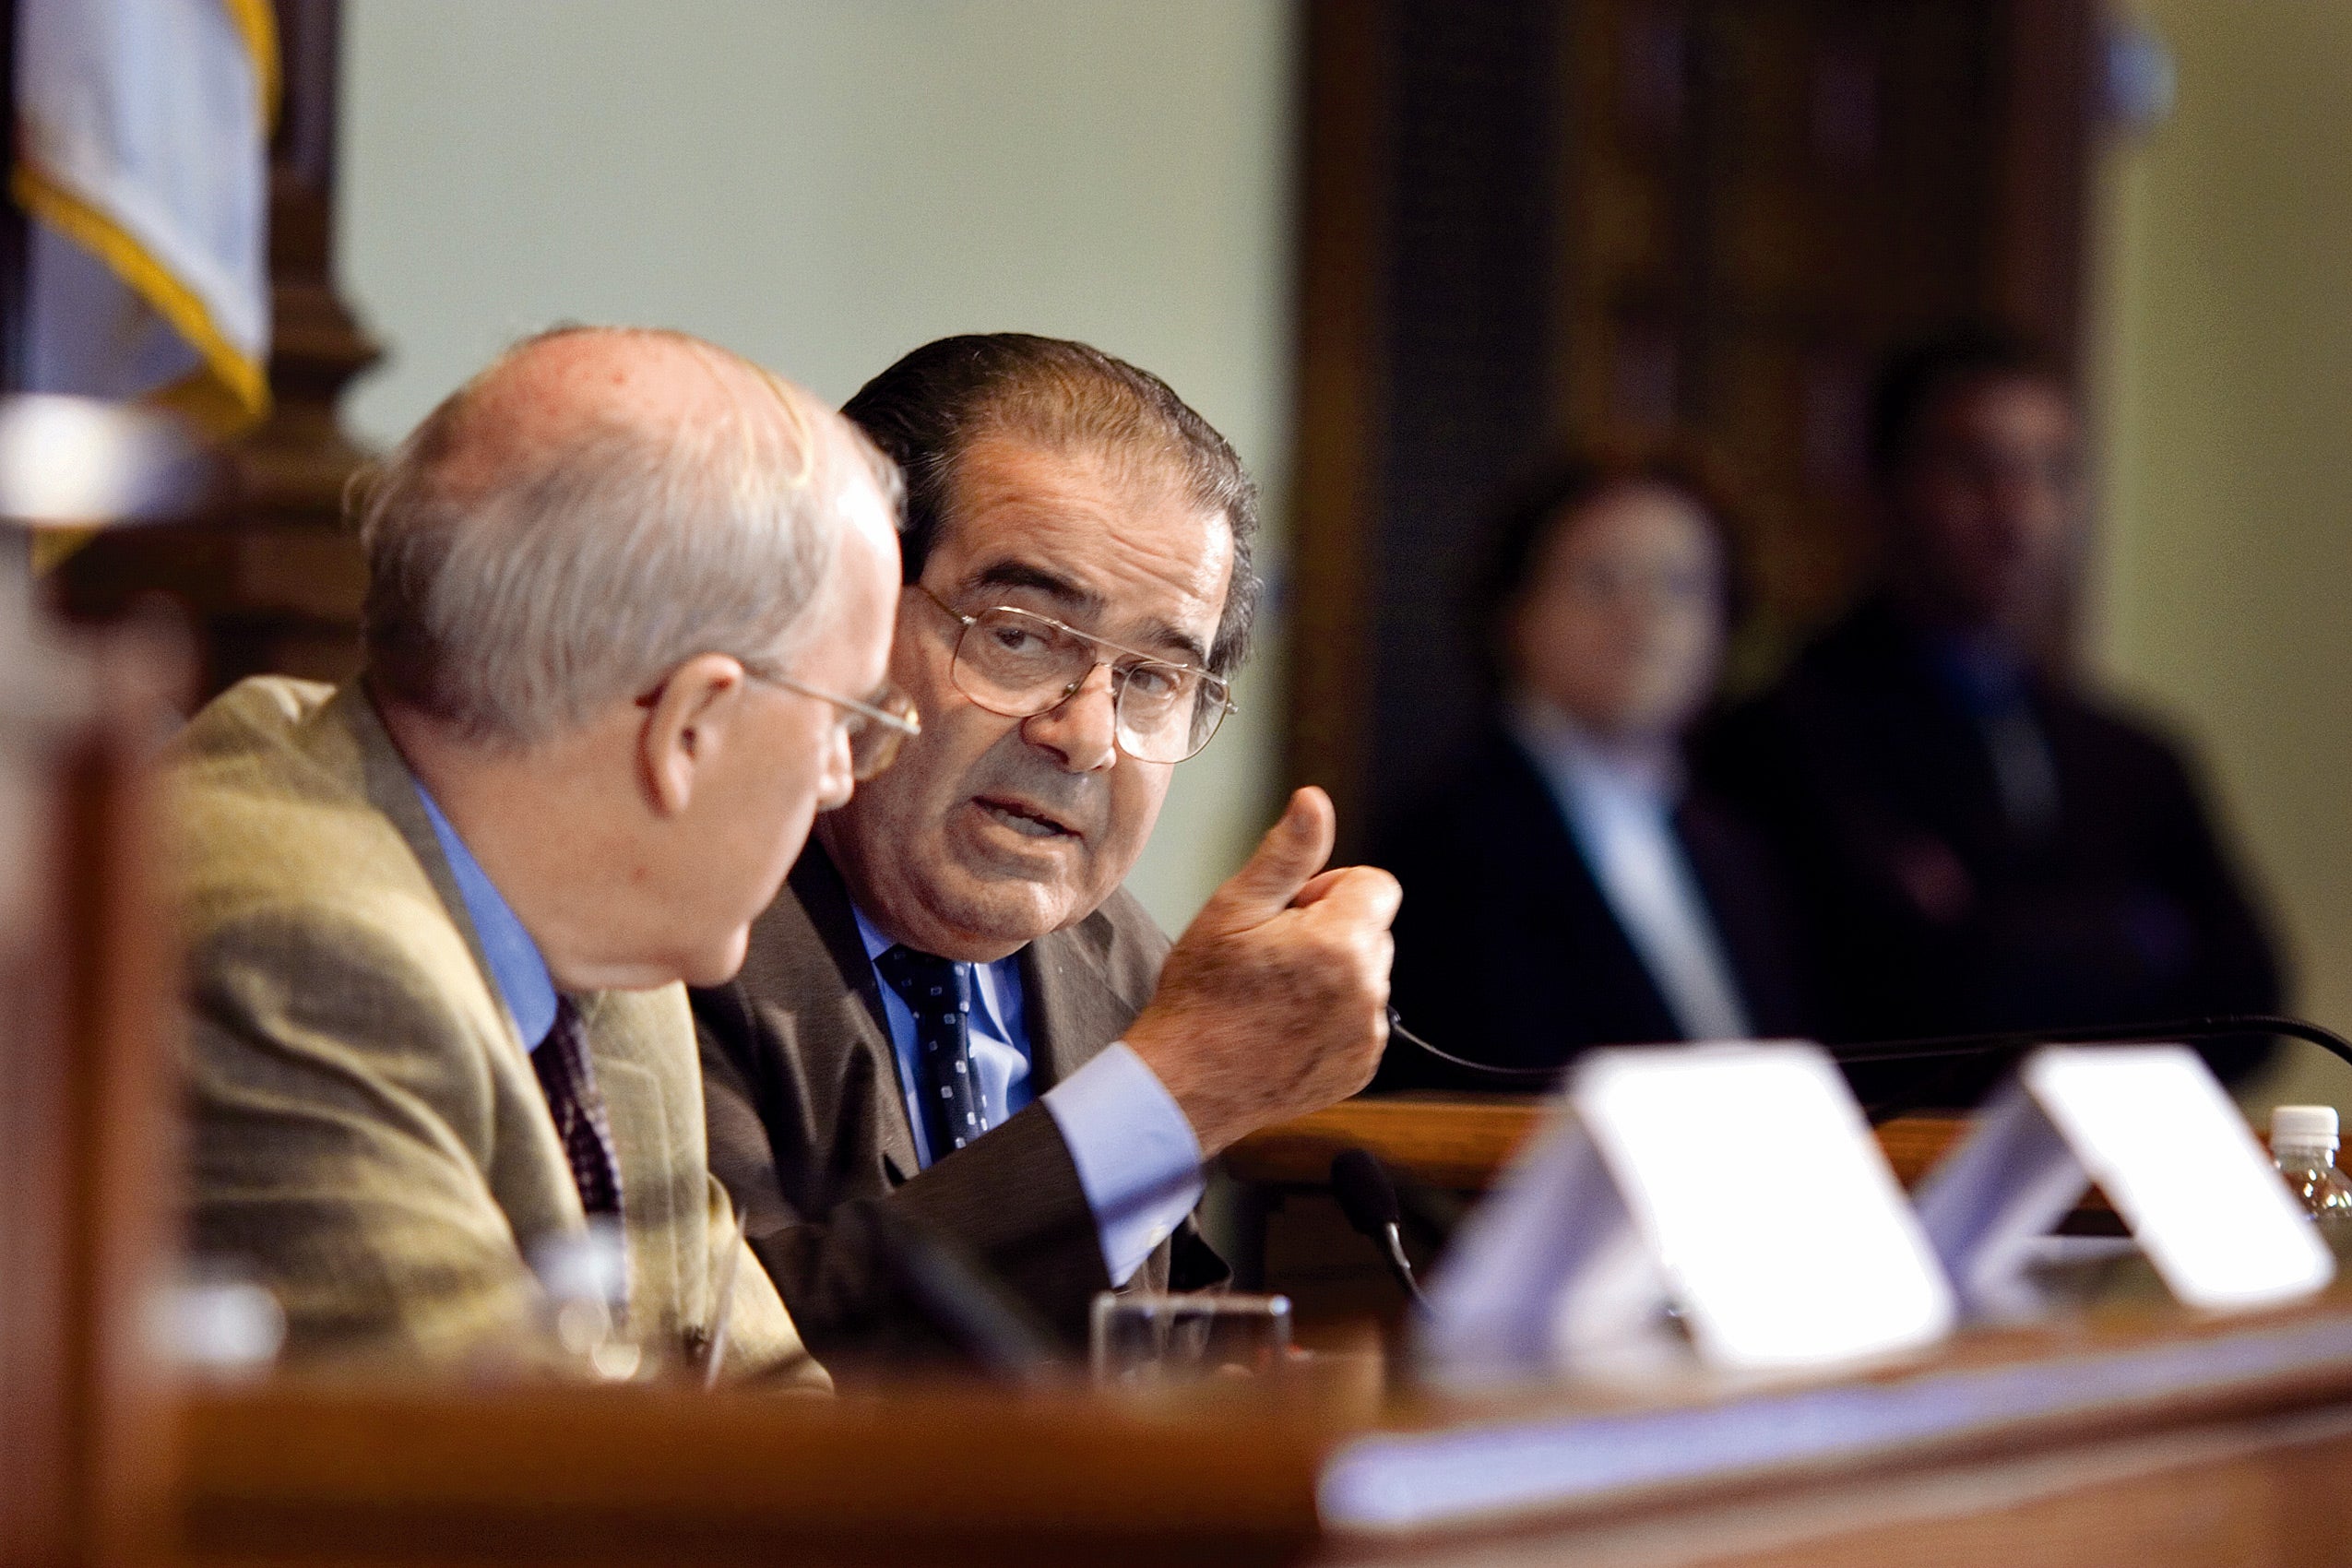 Justice Antonin Scalia on a panel speaking to another panelist behind a wooden desk